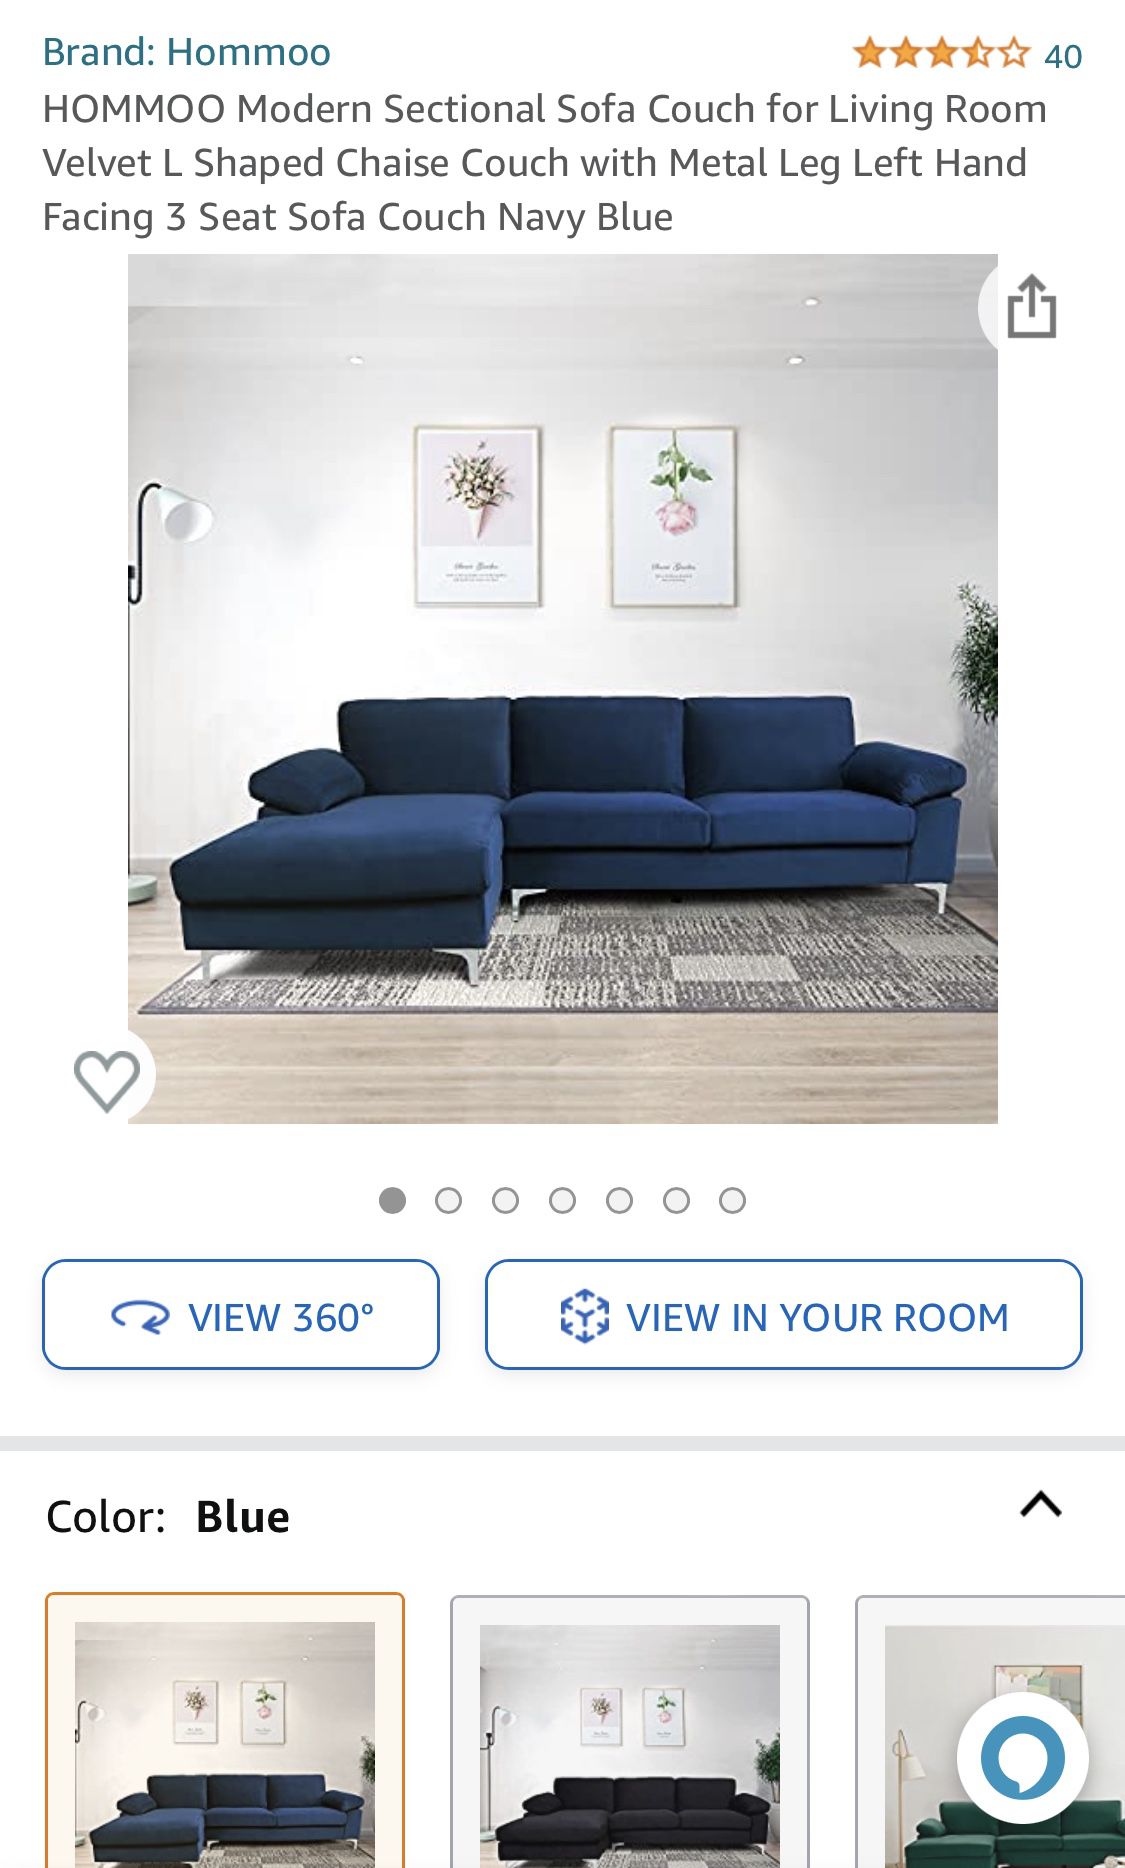 Hommoo Modern Sectional Sofa Couch 